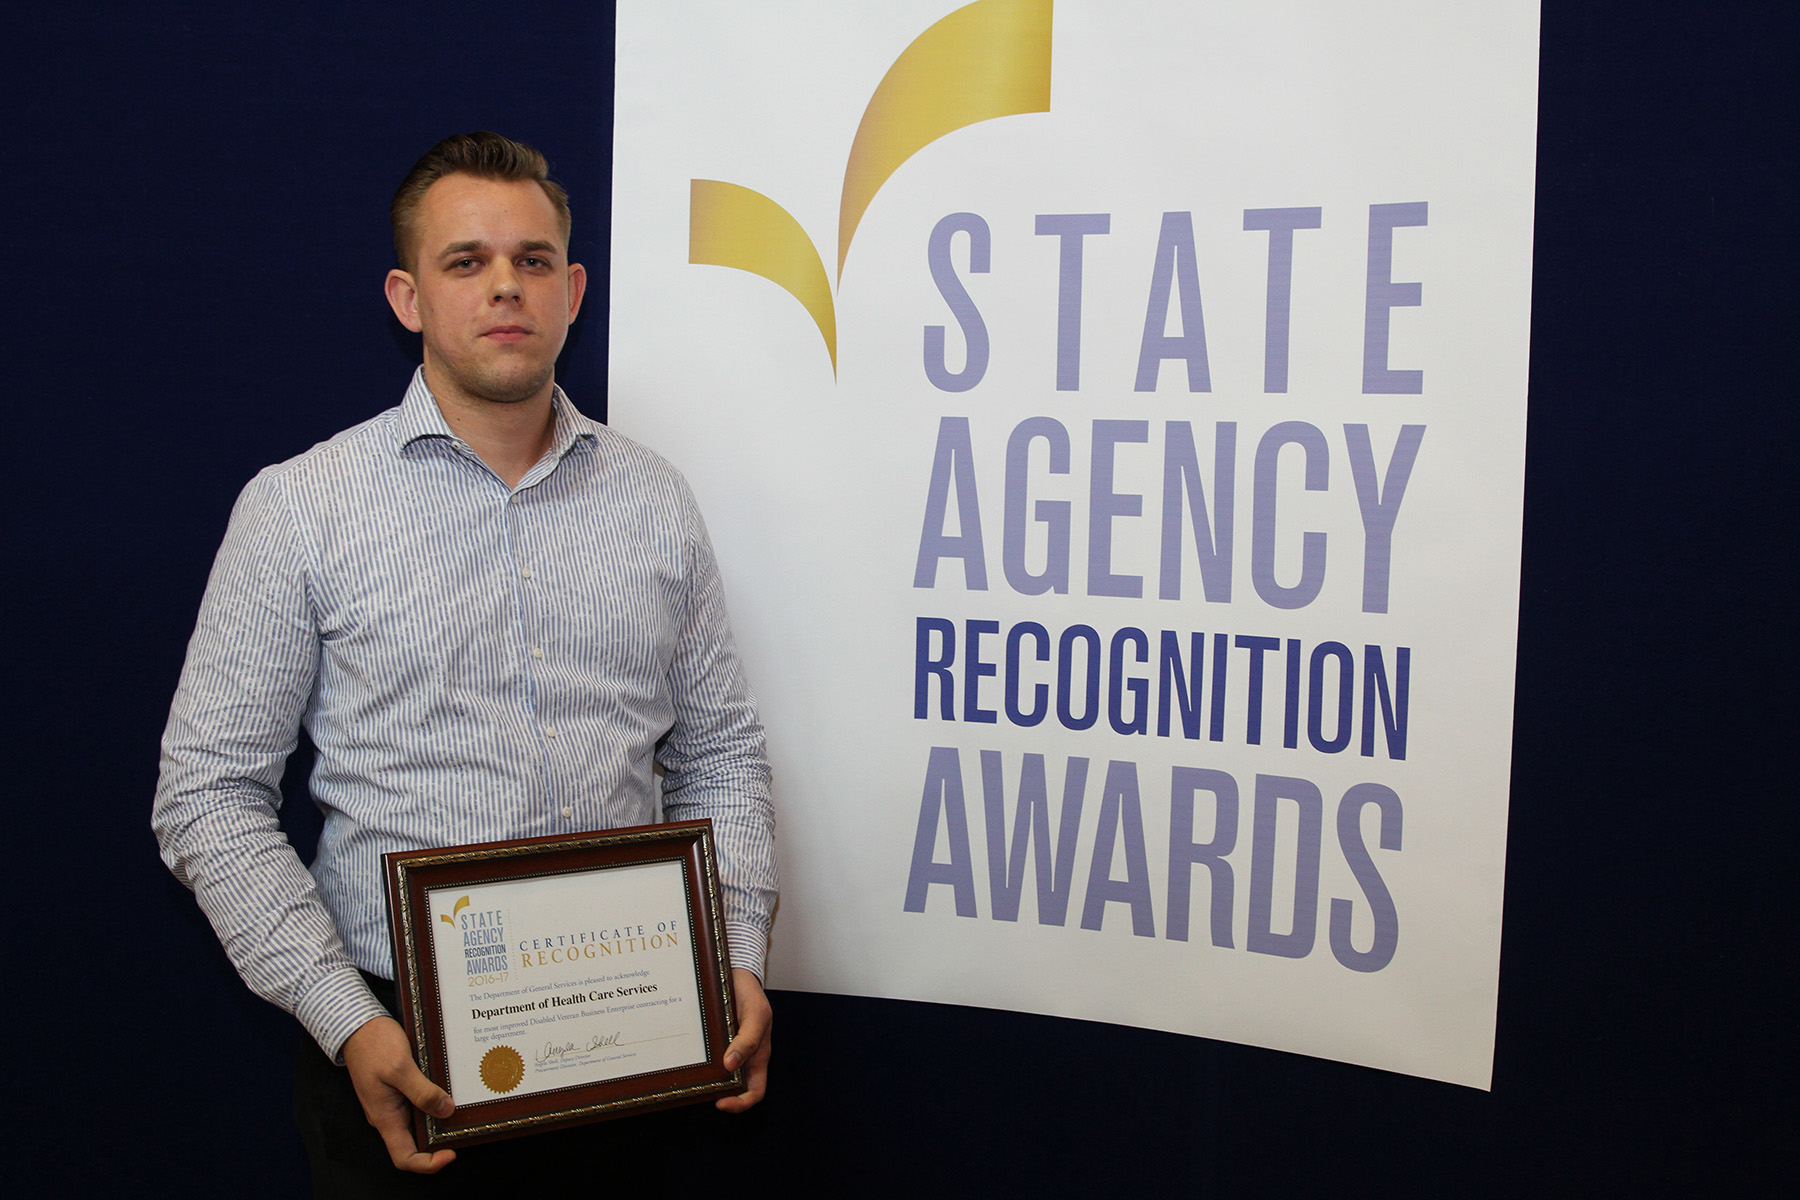 Max Lyulkin accepts the most improved small business participation award for the Department of Health Care Services for the large agency category